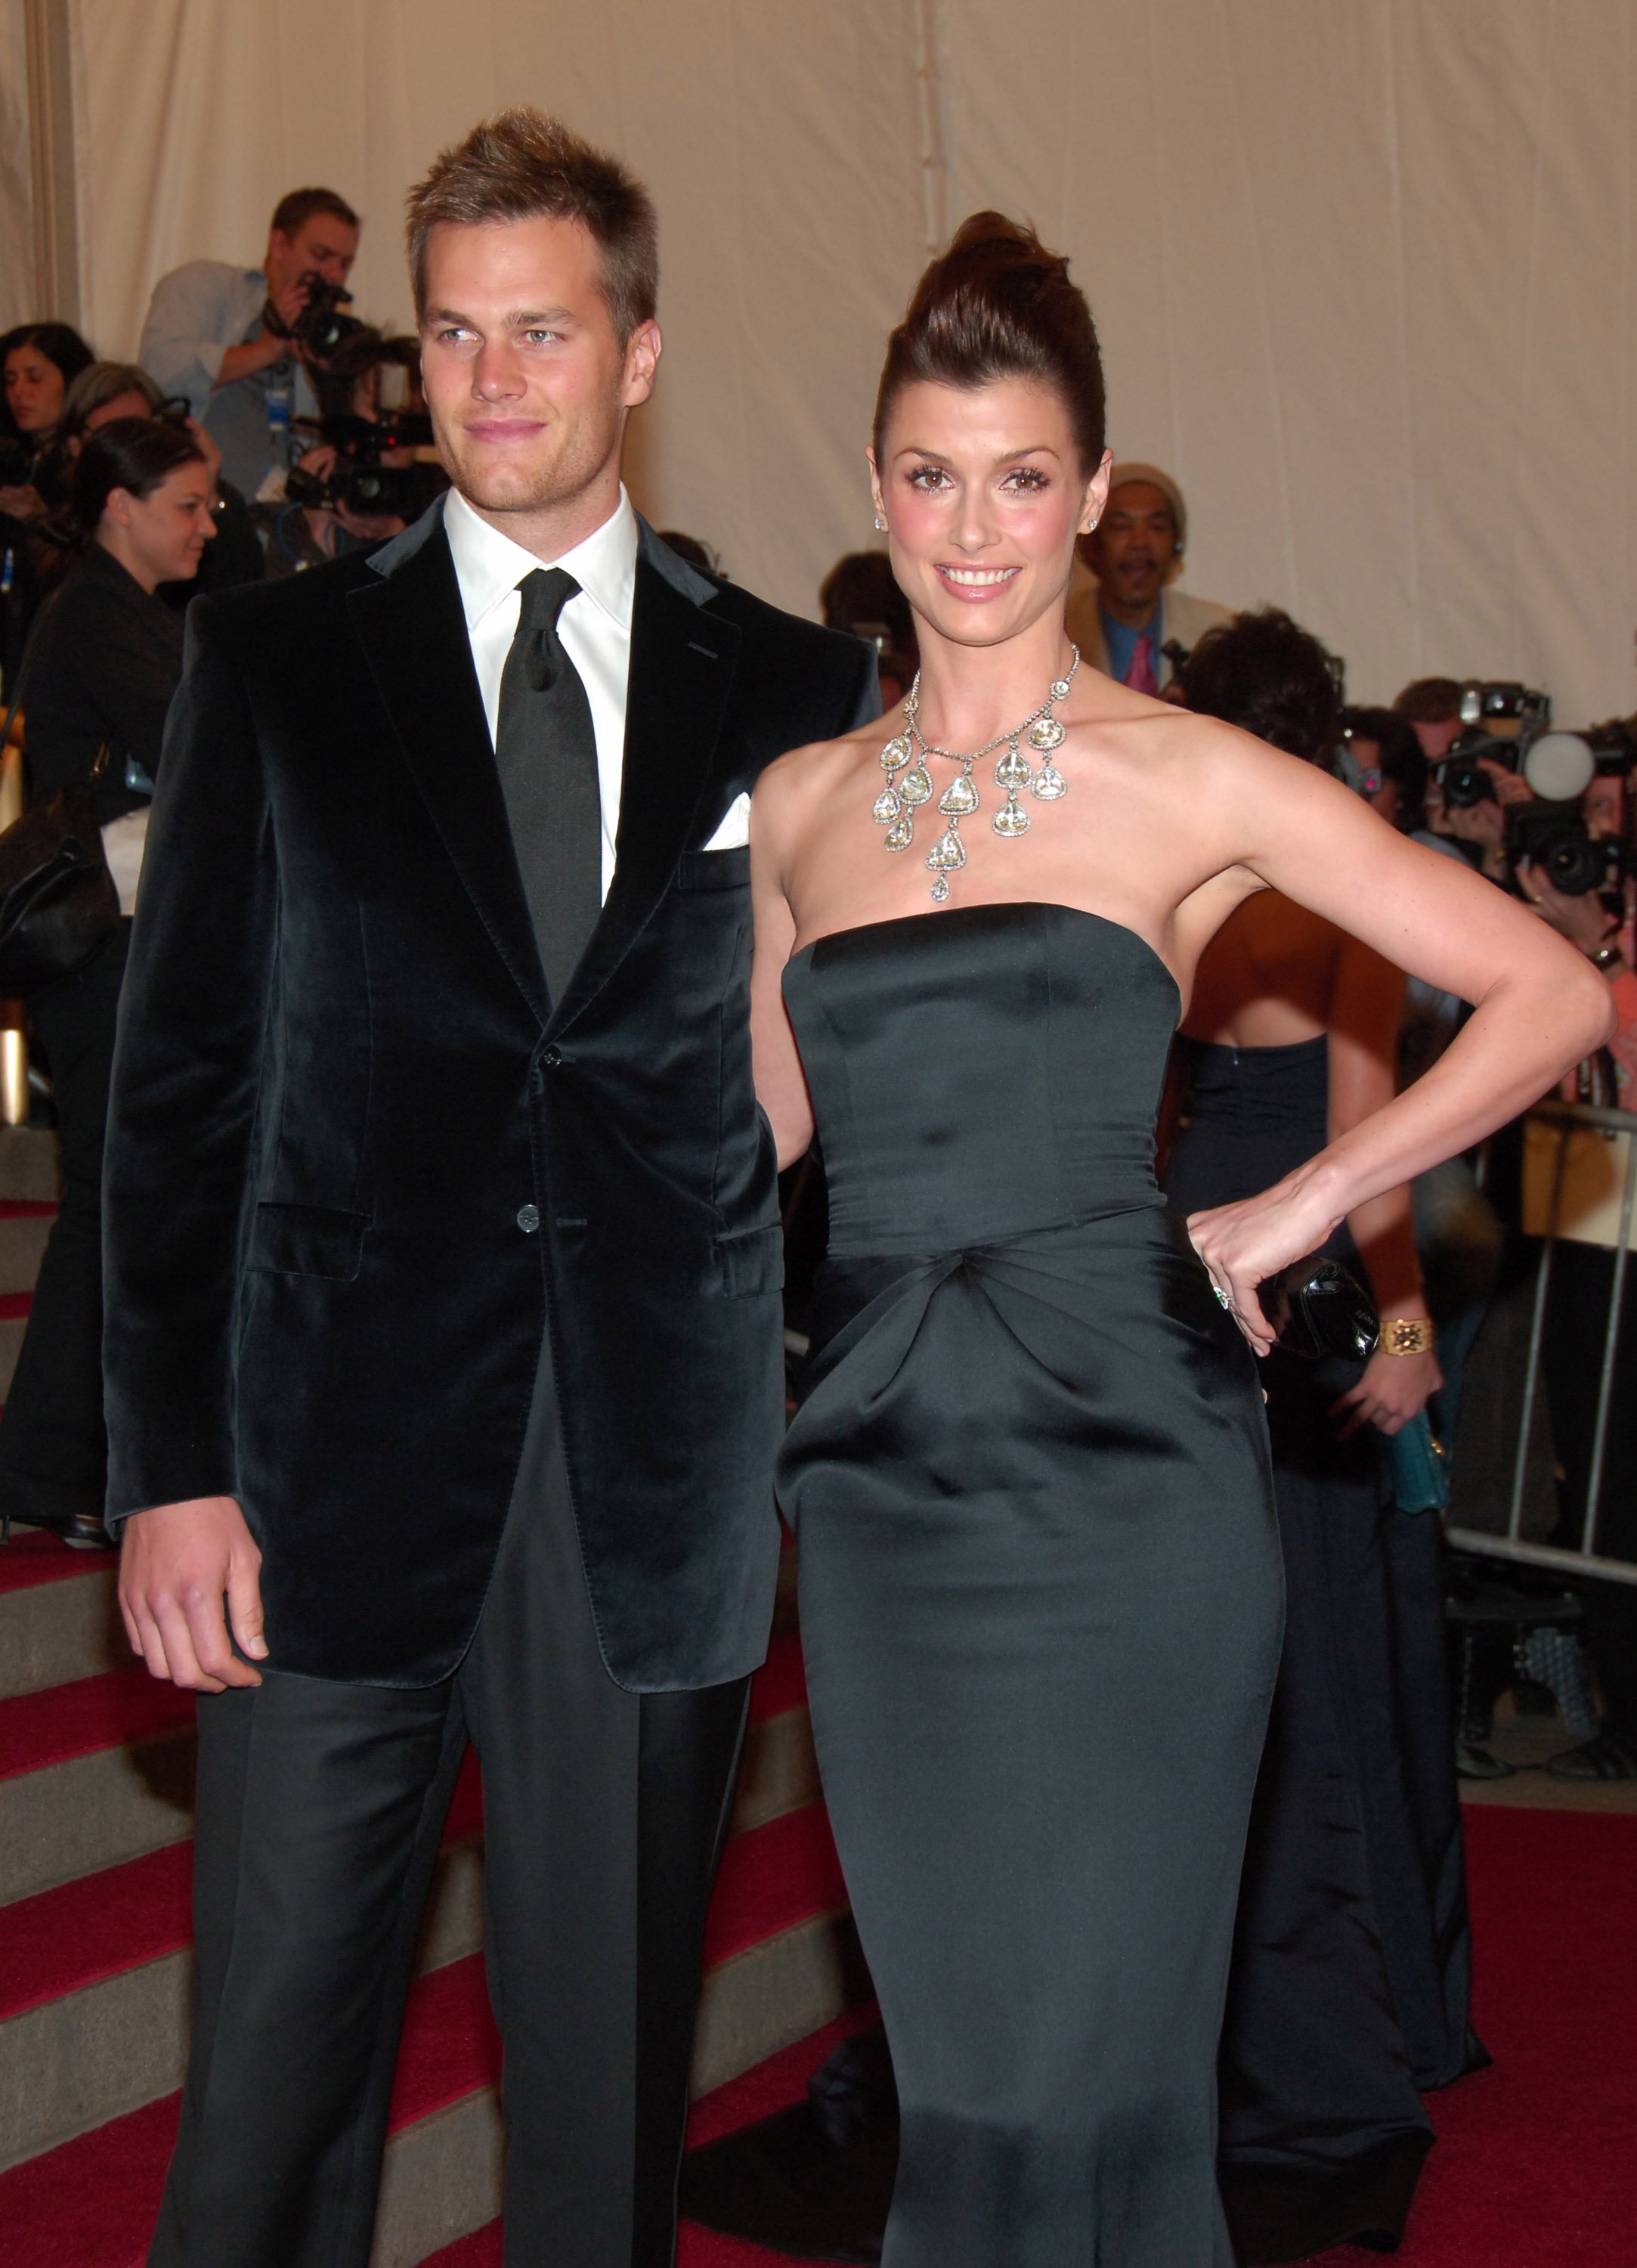 Tom Brady and Bridget Moynahan during "AngloMania" Costume Institute Gala at The Metropolitan Museum of Art - Arrivals. | Source: Getty Images